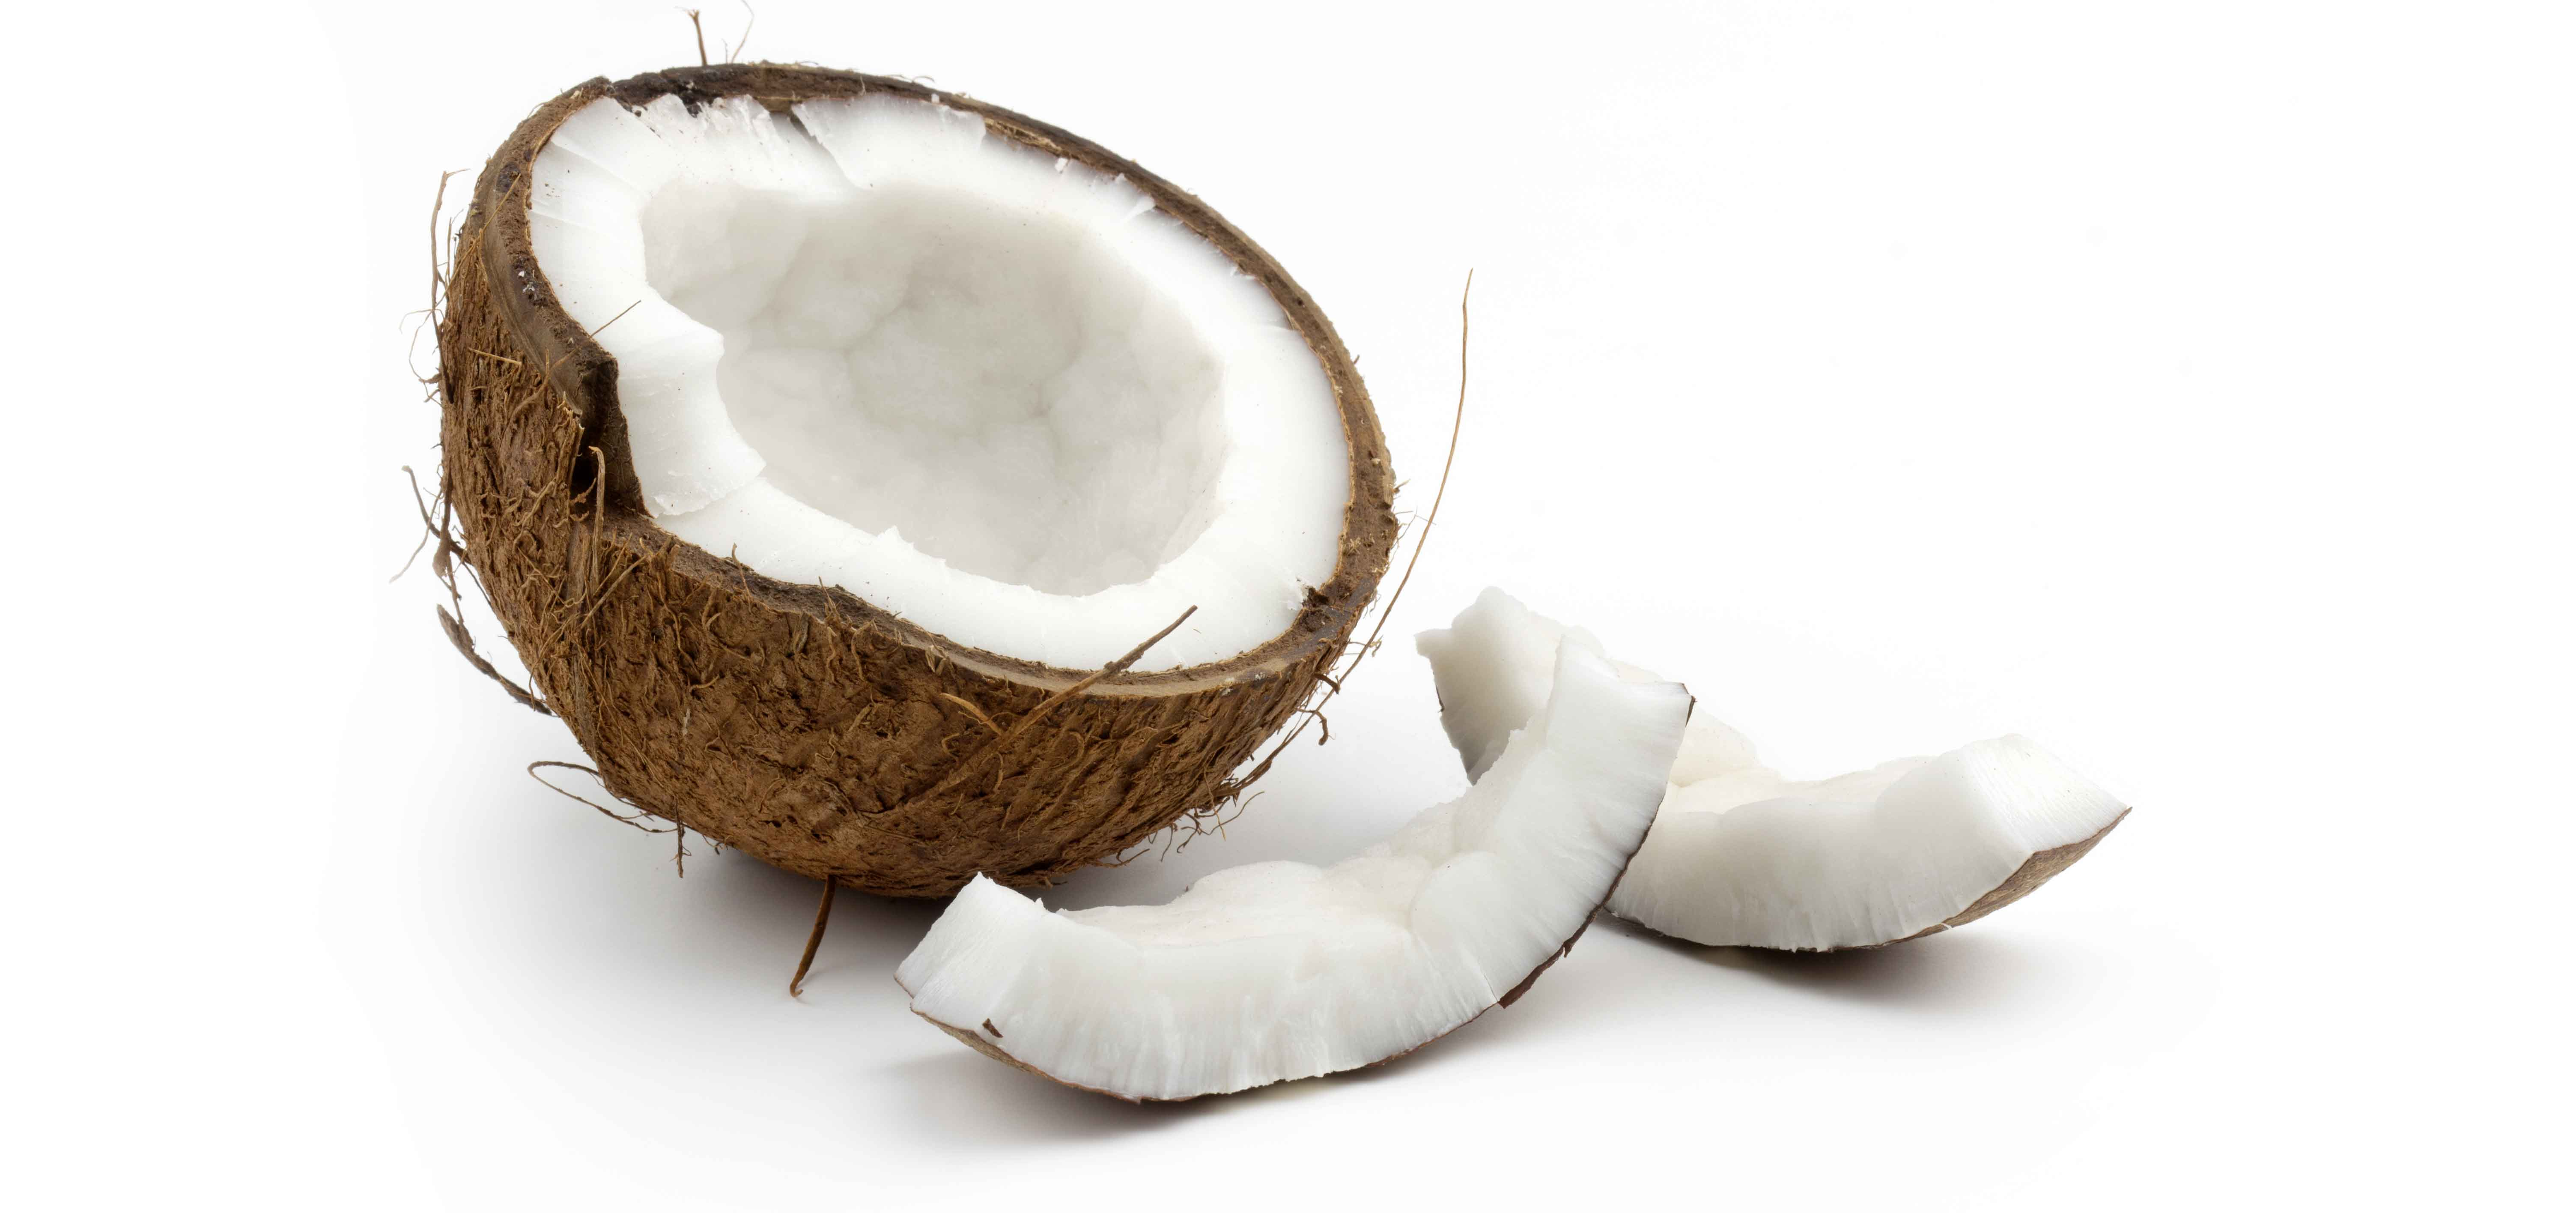 10 Incredible Health Benefits Of The Coconut